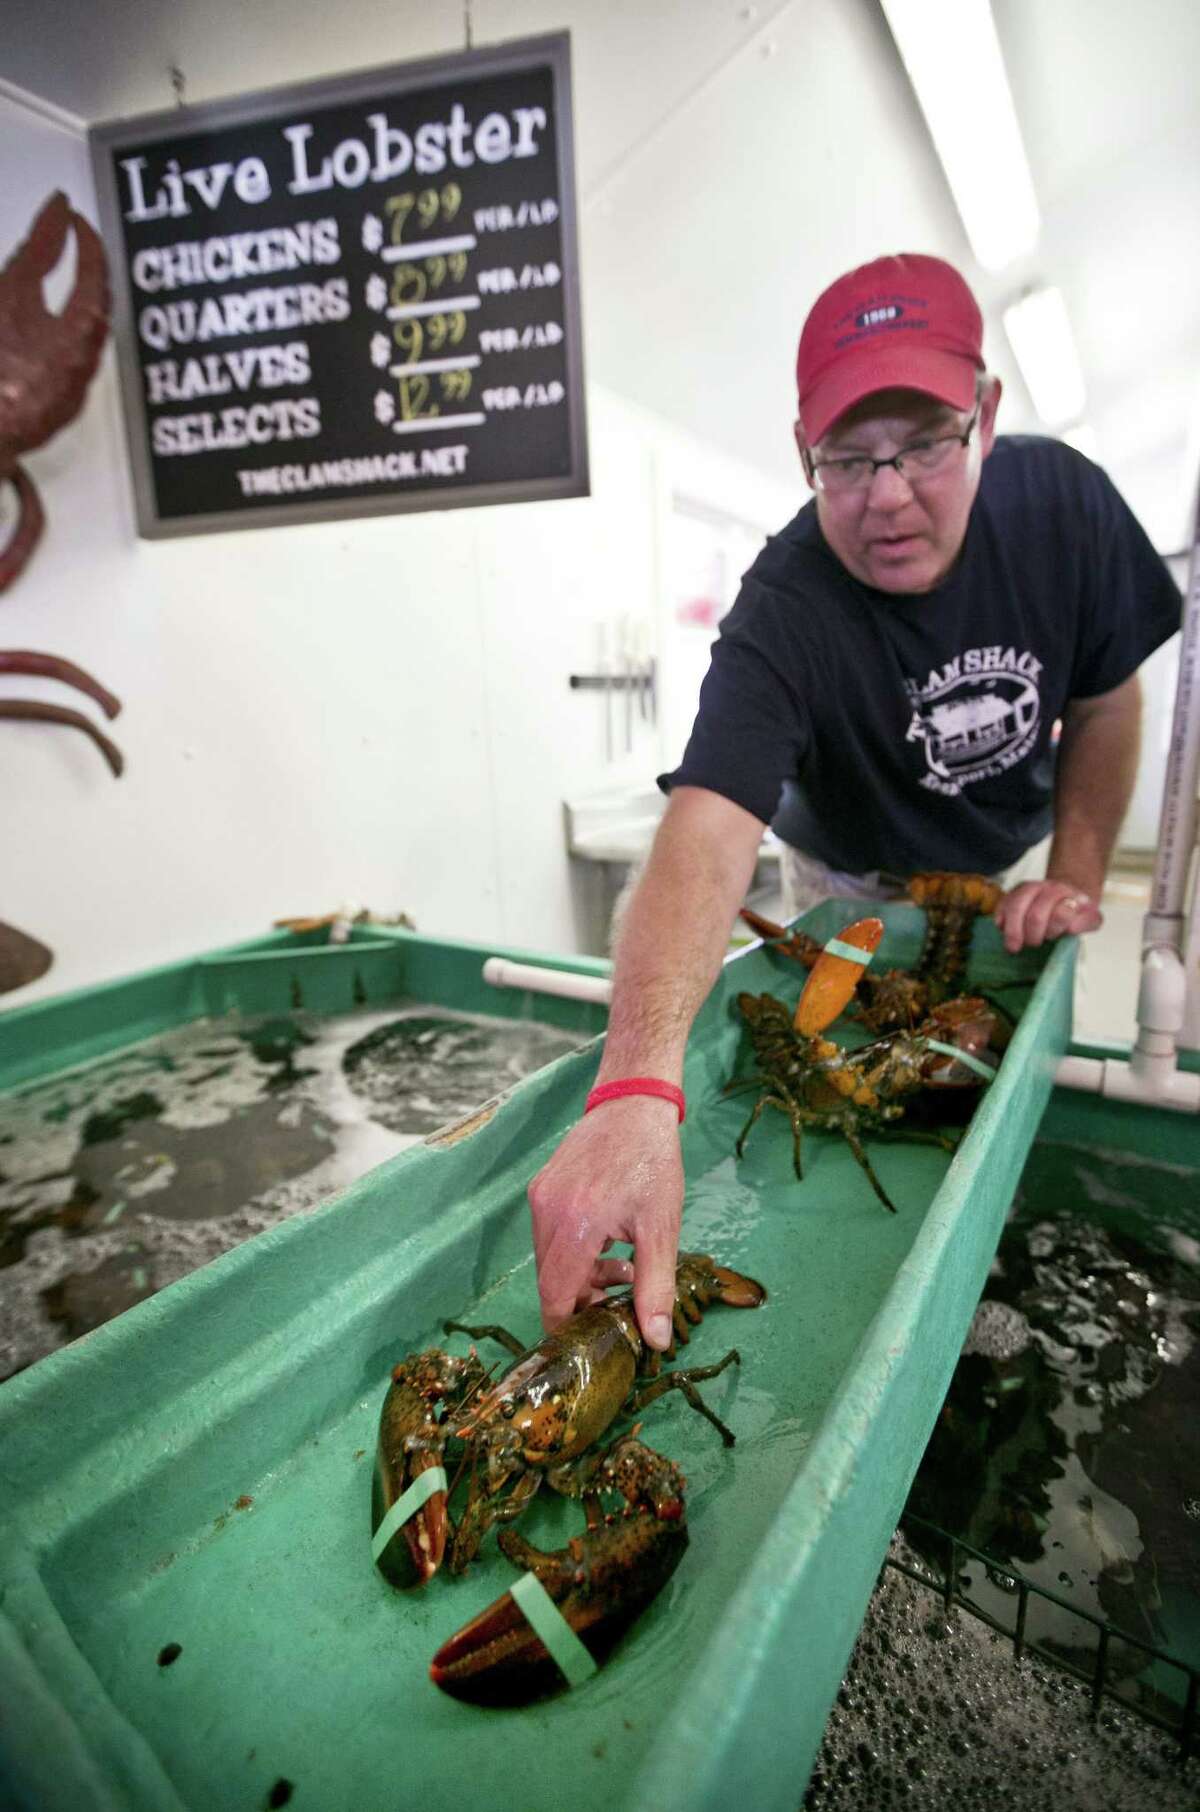 Steve Kingston, owner of the Clam Shack in Kennebunkport, Maine, sorts lobsters at his restaurant, Friday, June 12, 2015. One pound "chicken" lobsters sell for $7.99 per pound while two-pound "selects" sell for $12.99. (AP Photo/Robert F. Bukaty)